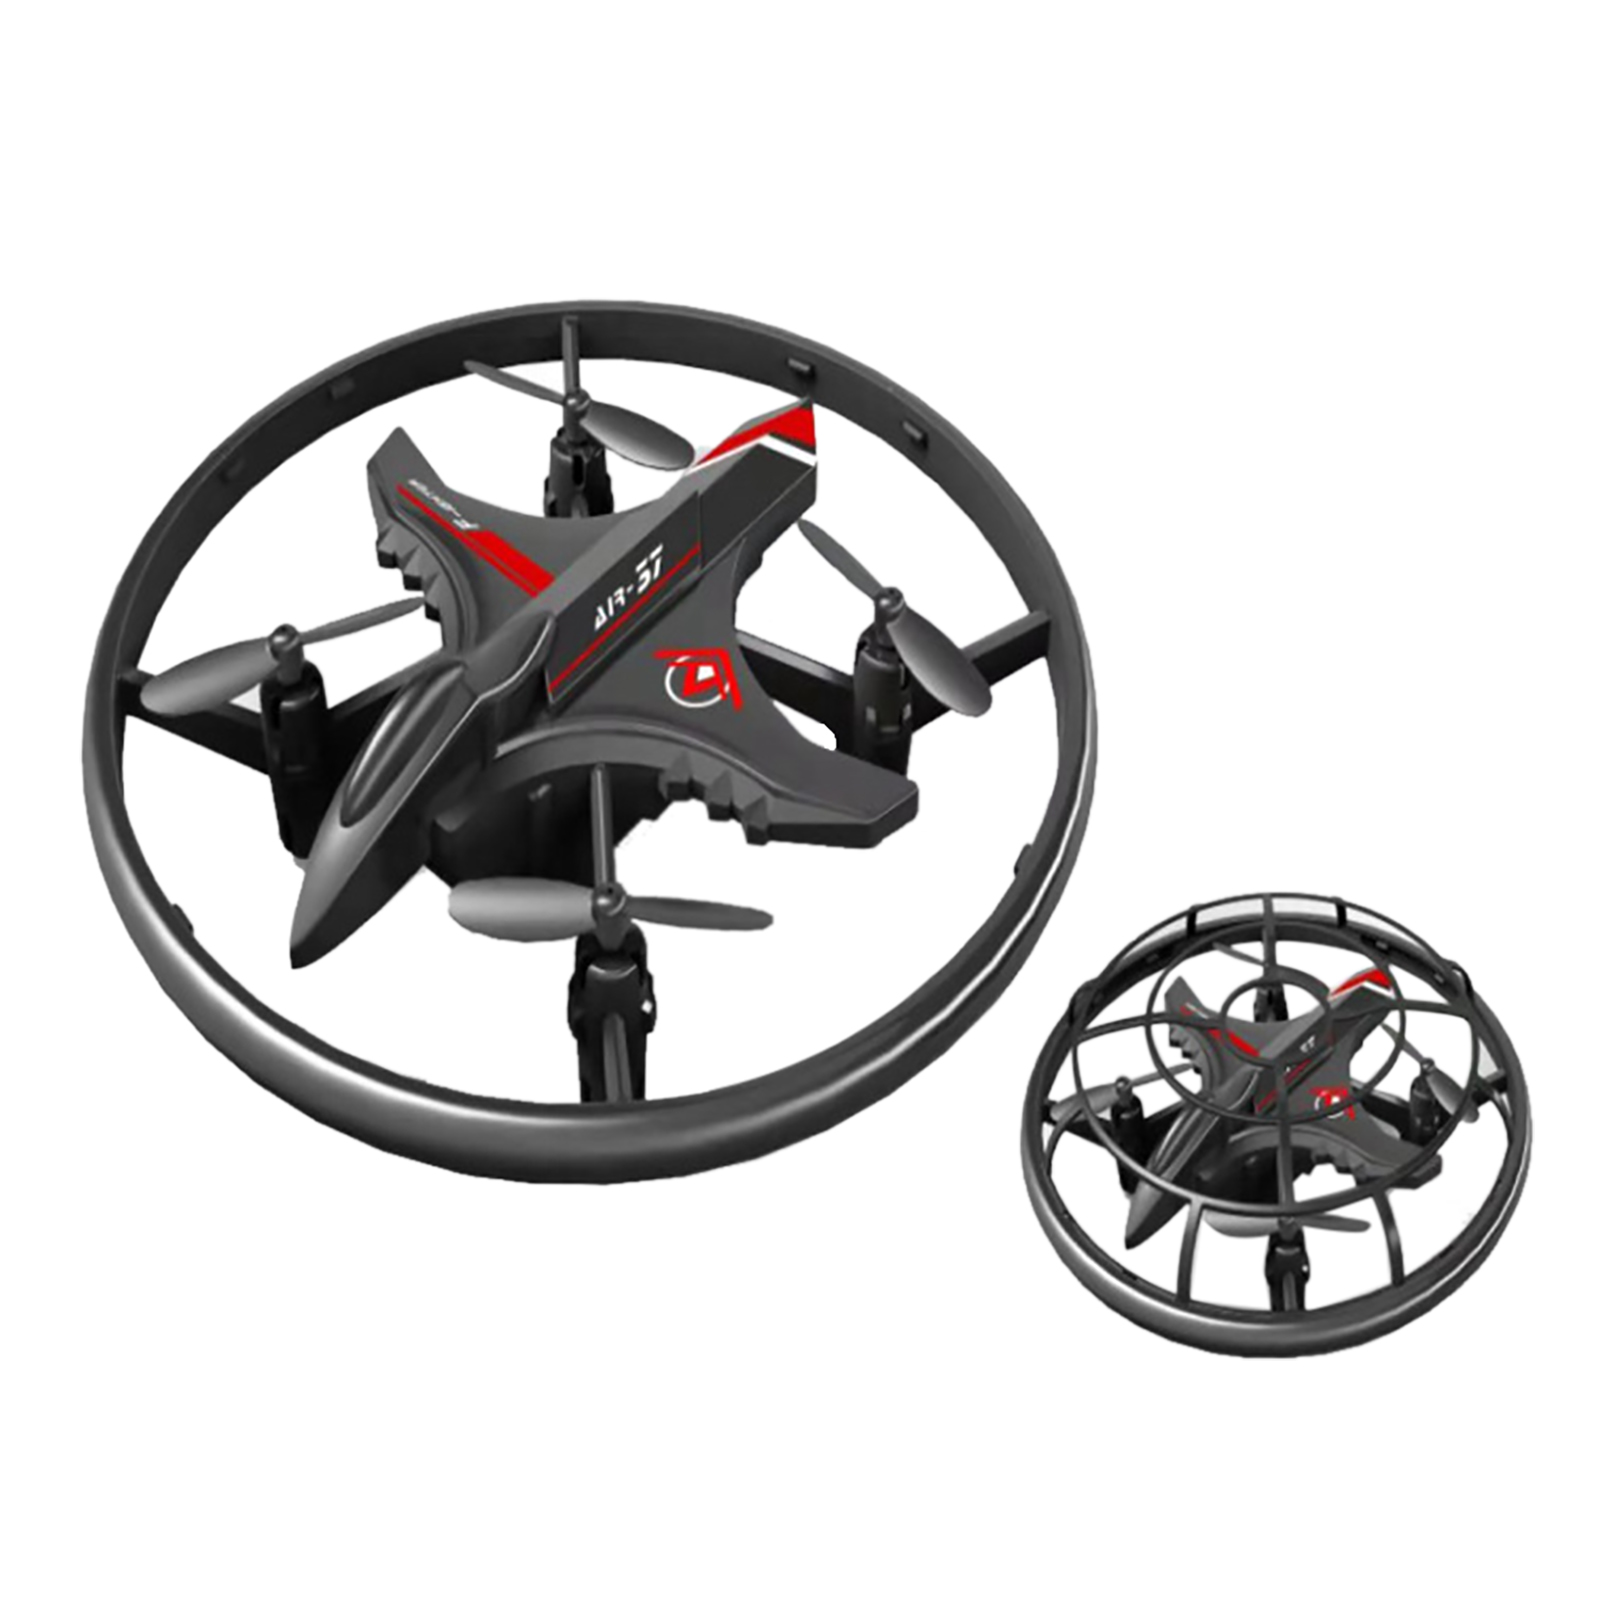 Mini RC Drone with LED Light 2.4g 360 Degree Rotation Headless Mode Fixed Altitude Remote Control Quadcopter